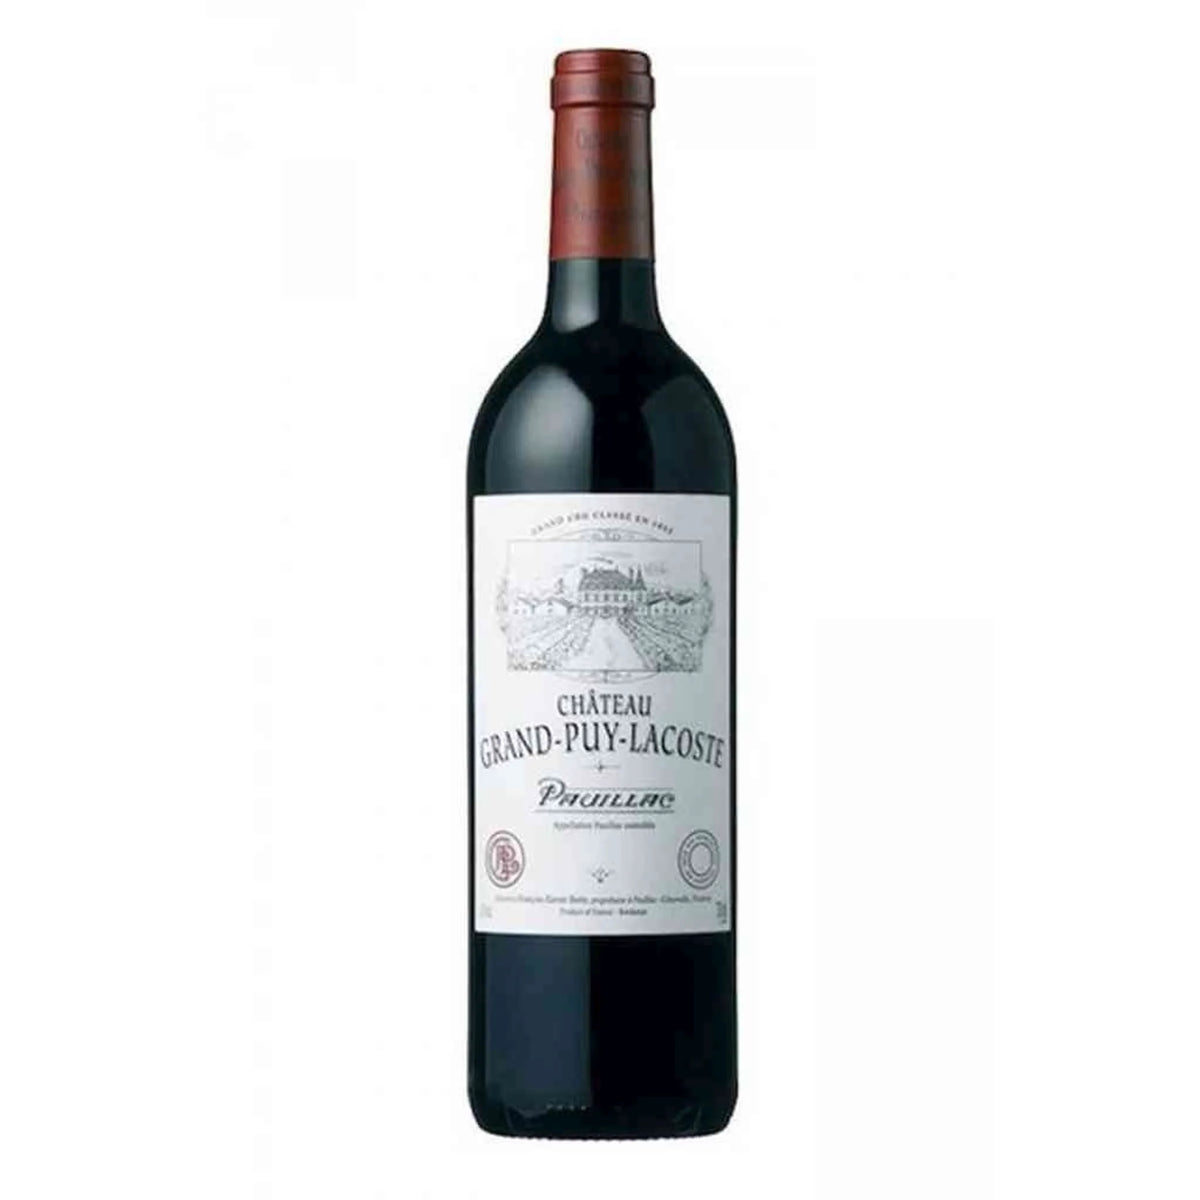 Chateau Grand Puy Lacoste-Rotwein-Cabernet Franc, Cabernet Sauvignon, Merlot-2011 Grand Puy Lacoste-WINECOM